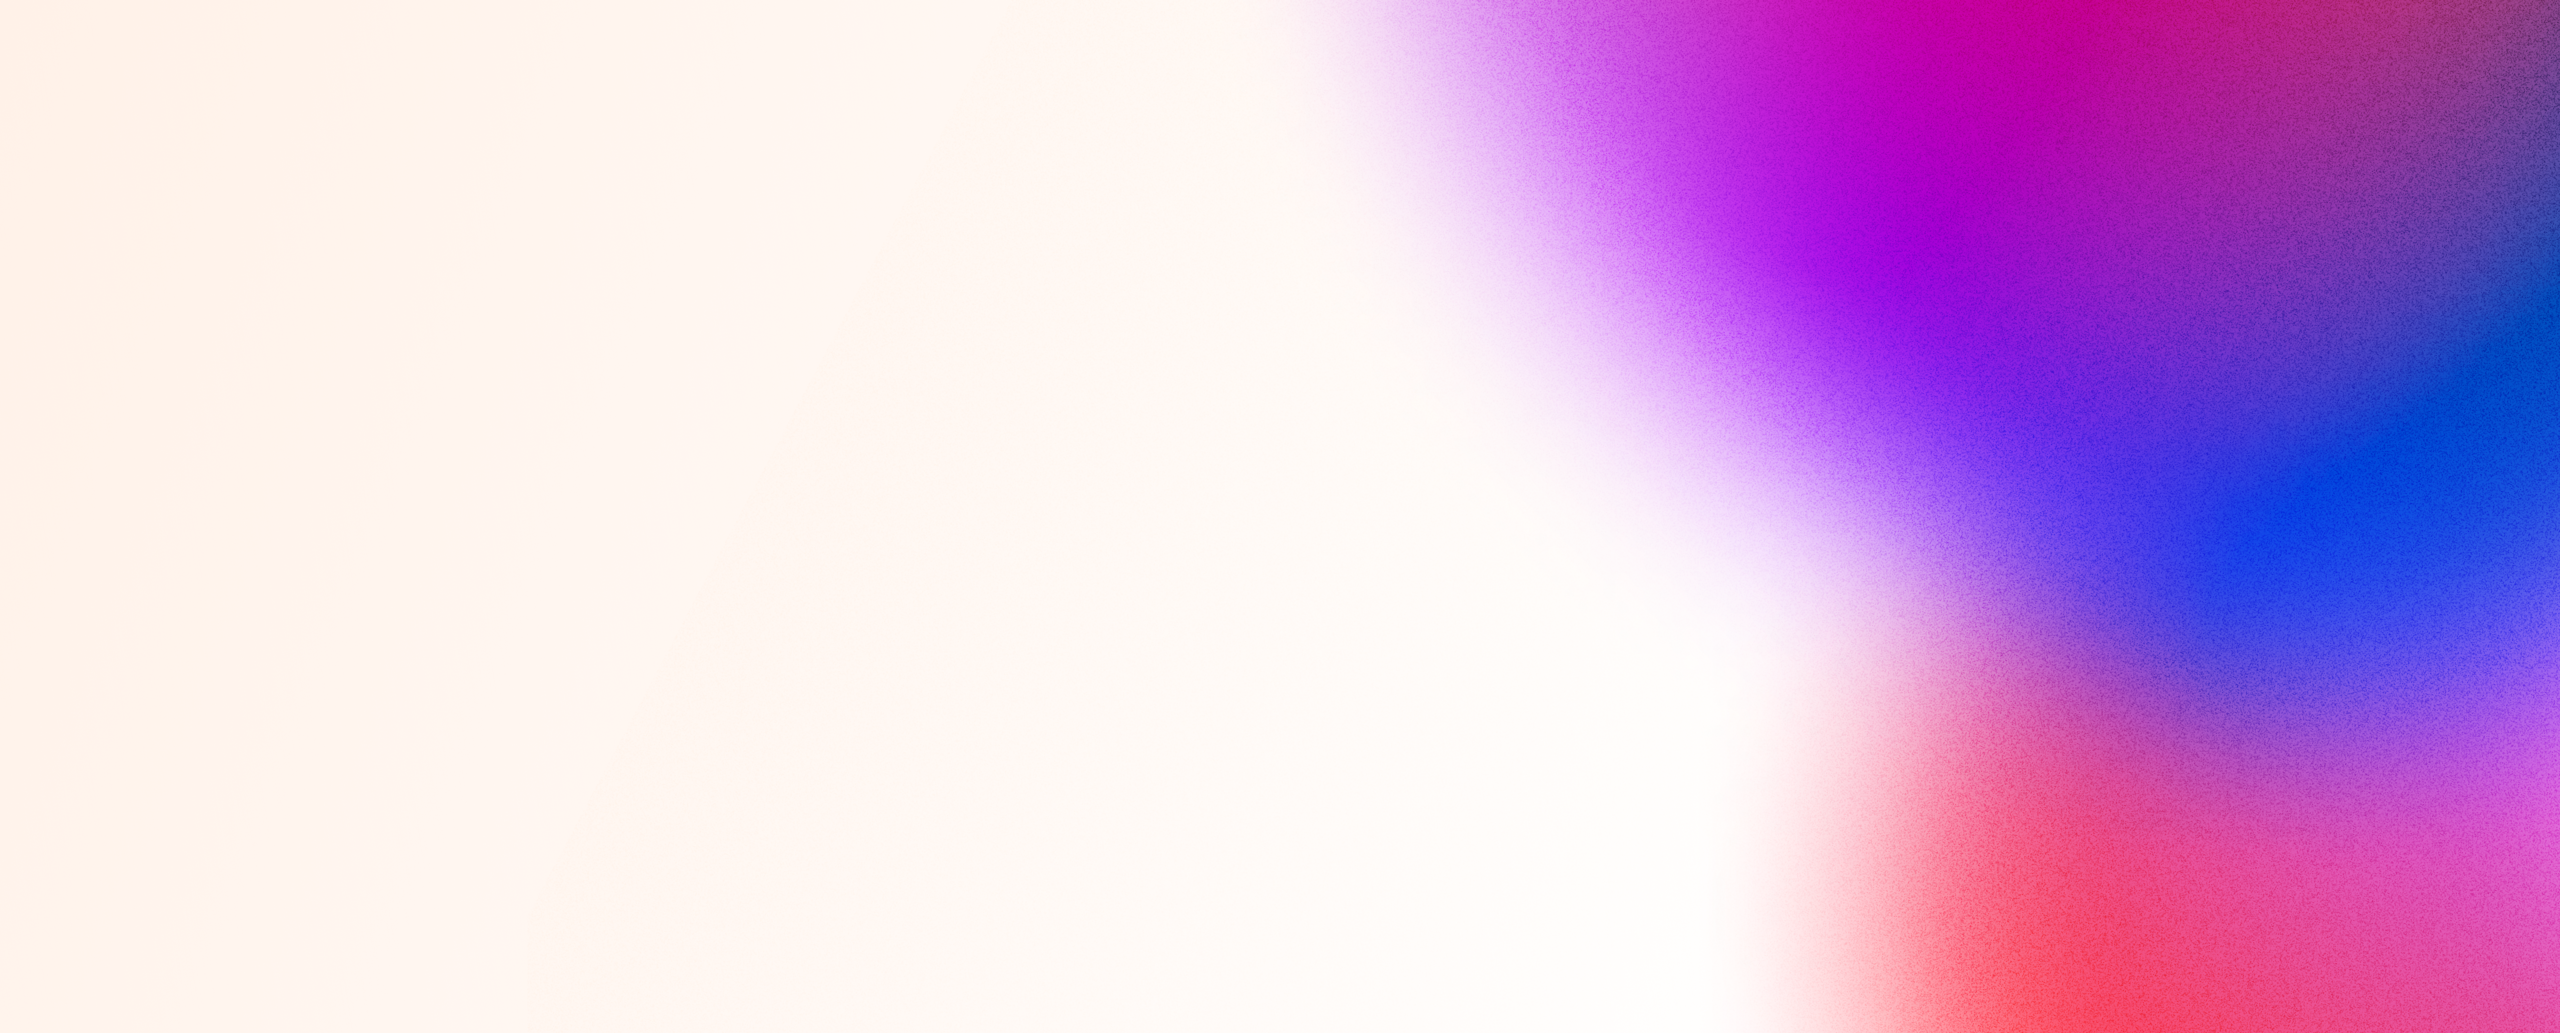 Colorful Subscribe Background Image